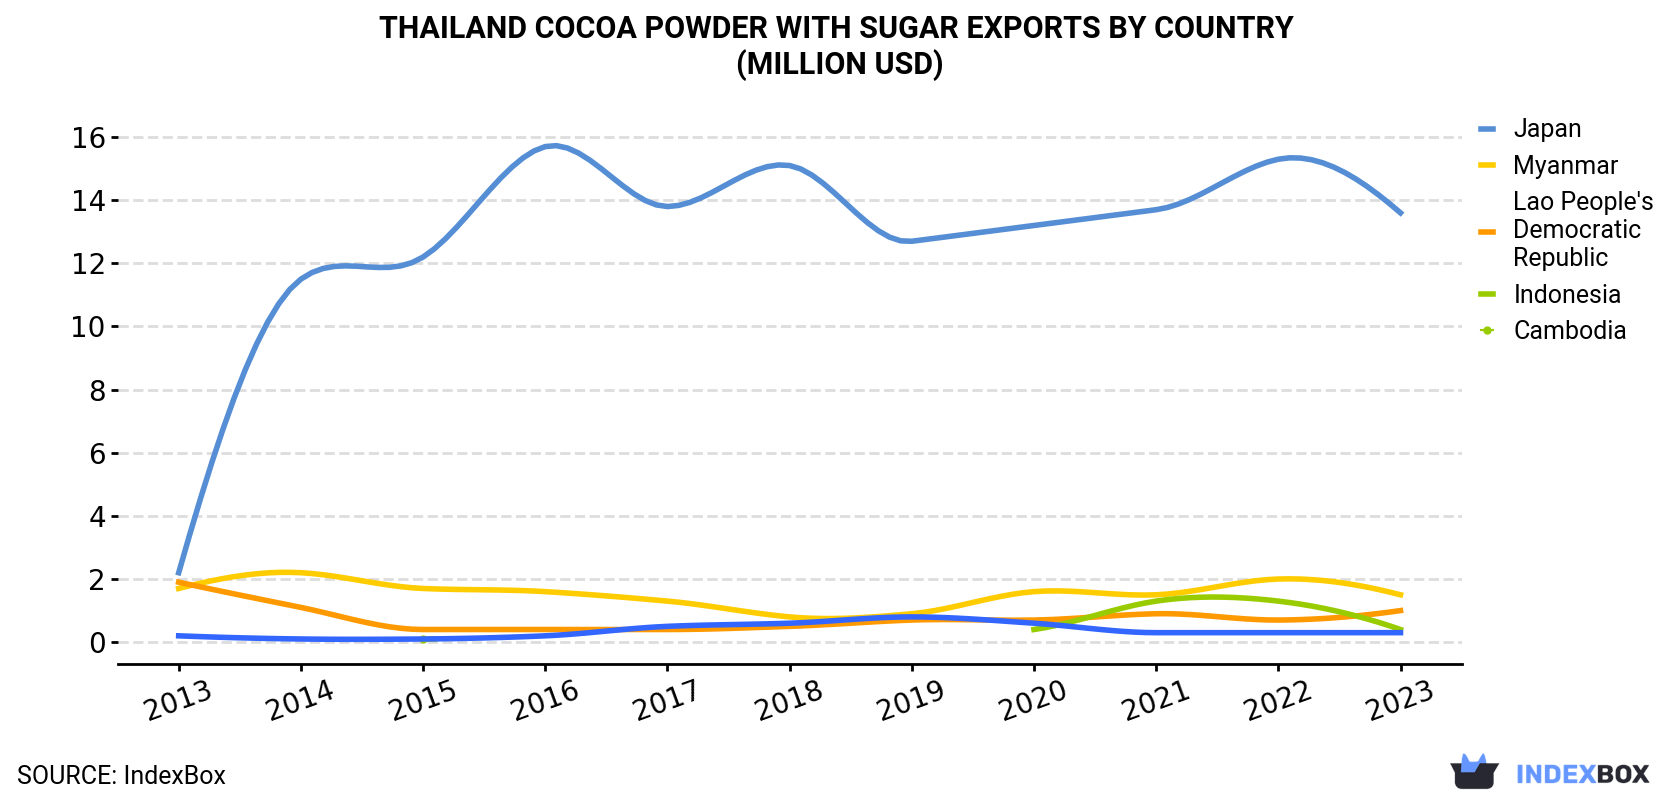 Thailand Cocoa Powder With Sugar Exports By Country (Million USD)